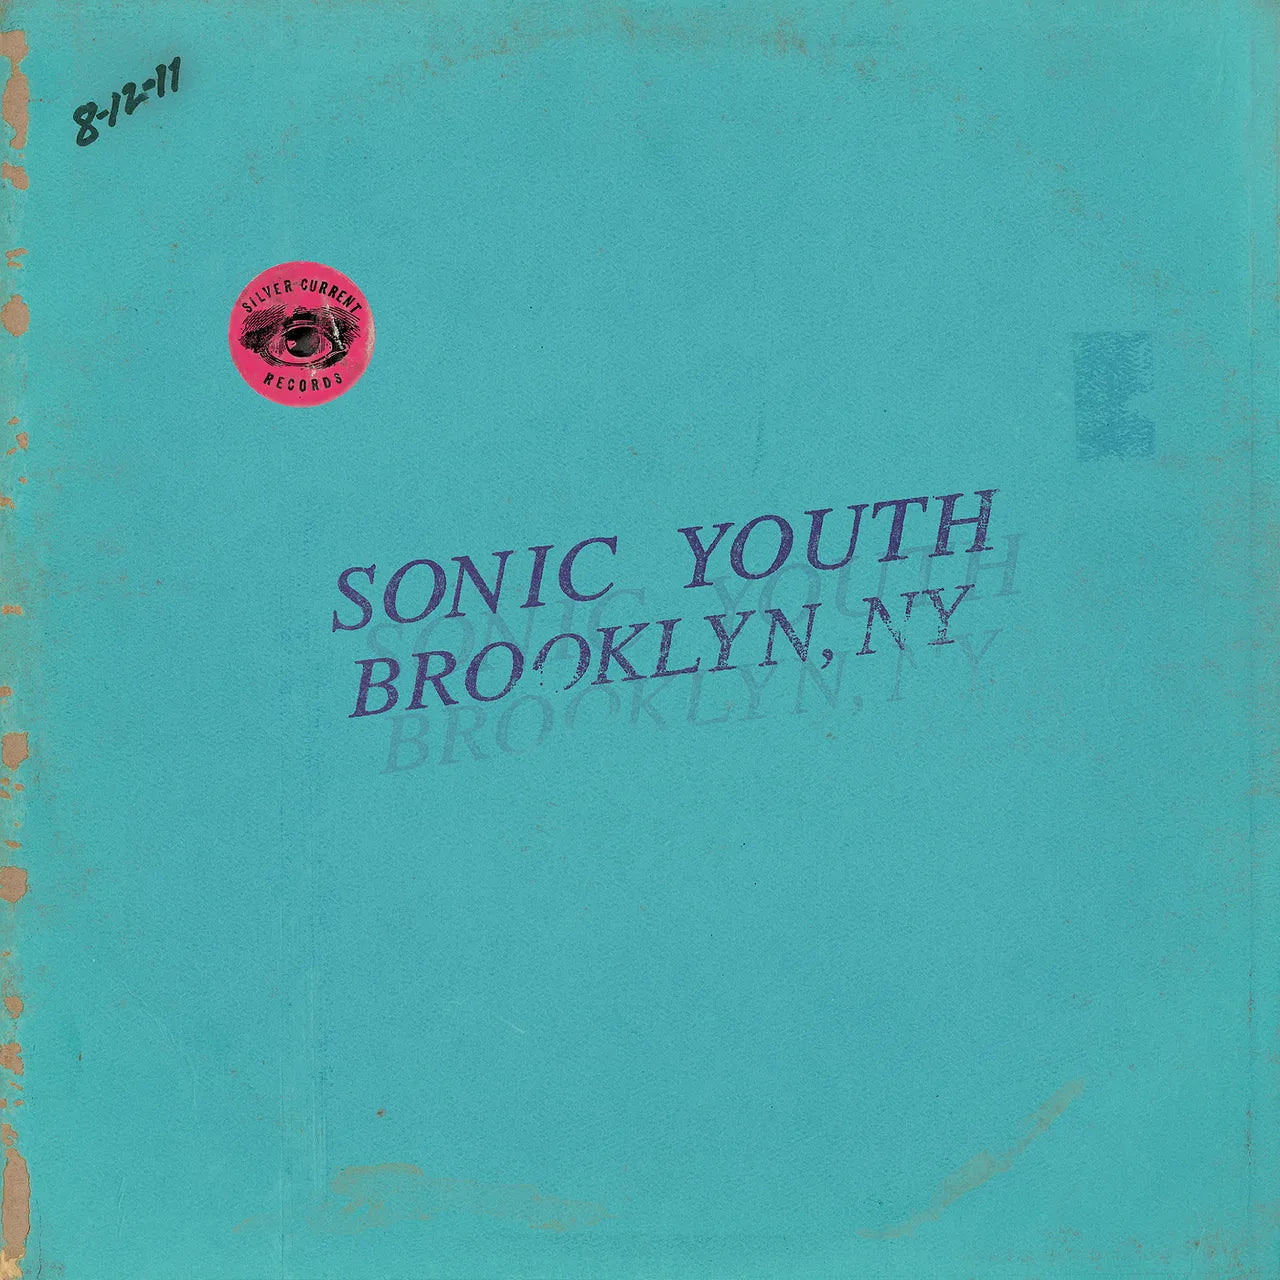 Sonic Youth - Live in Brooklyn 2011 (Vinyl 2LP)